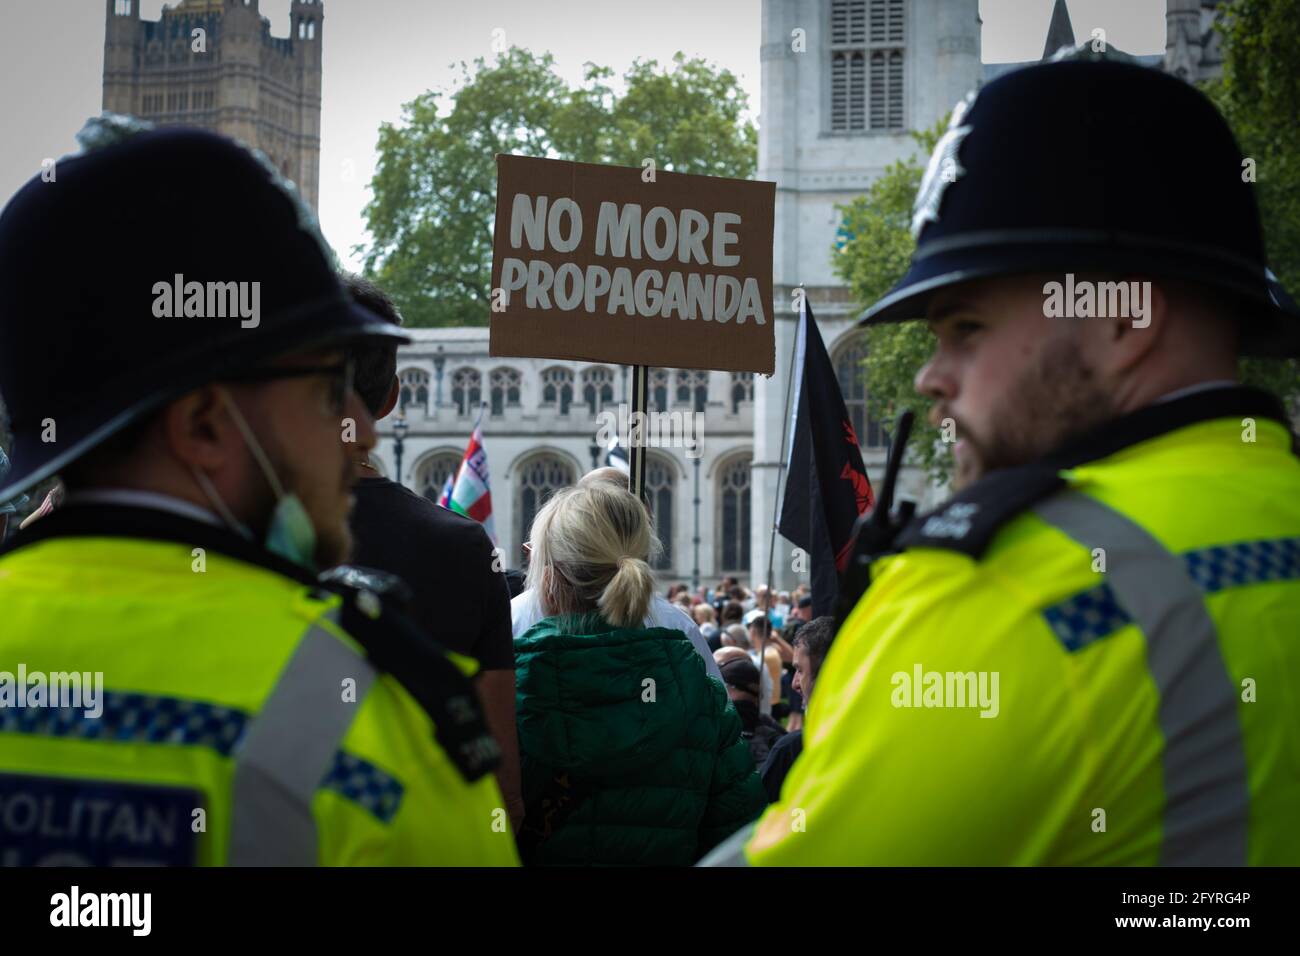 Manchester, UK. 29th May, 2021. The MET police monitor the start of a anti-lockdown protest. The number of people attending the protests has increased month on month since the introduction of the COVID-19 restrictions. Credit: Andy Barton/Alamy Live News Stock Photo